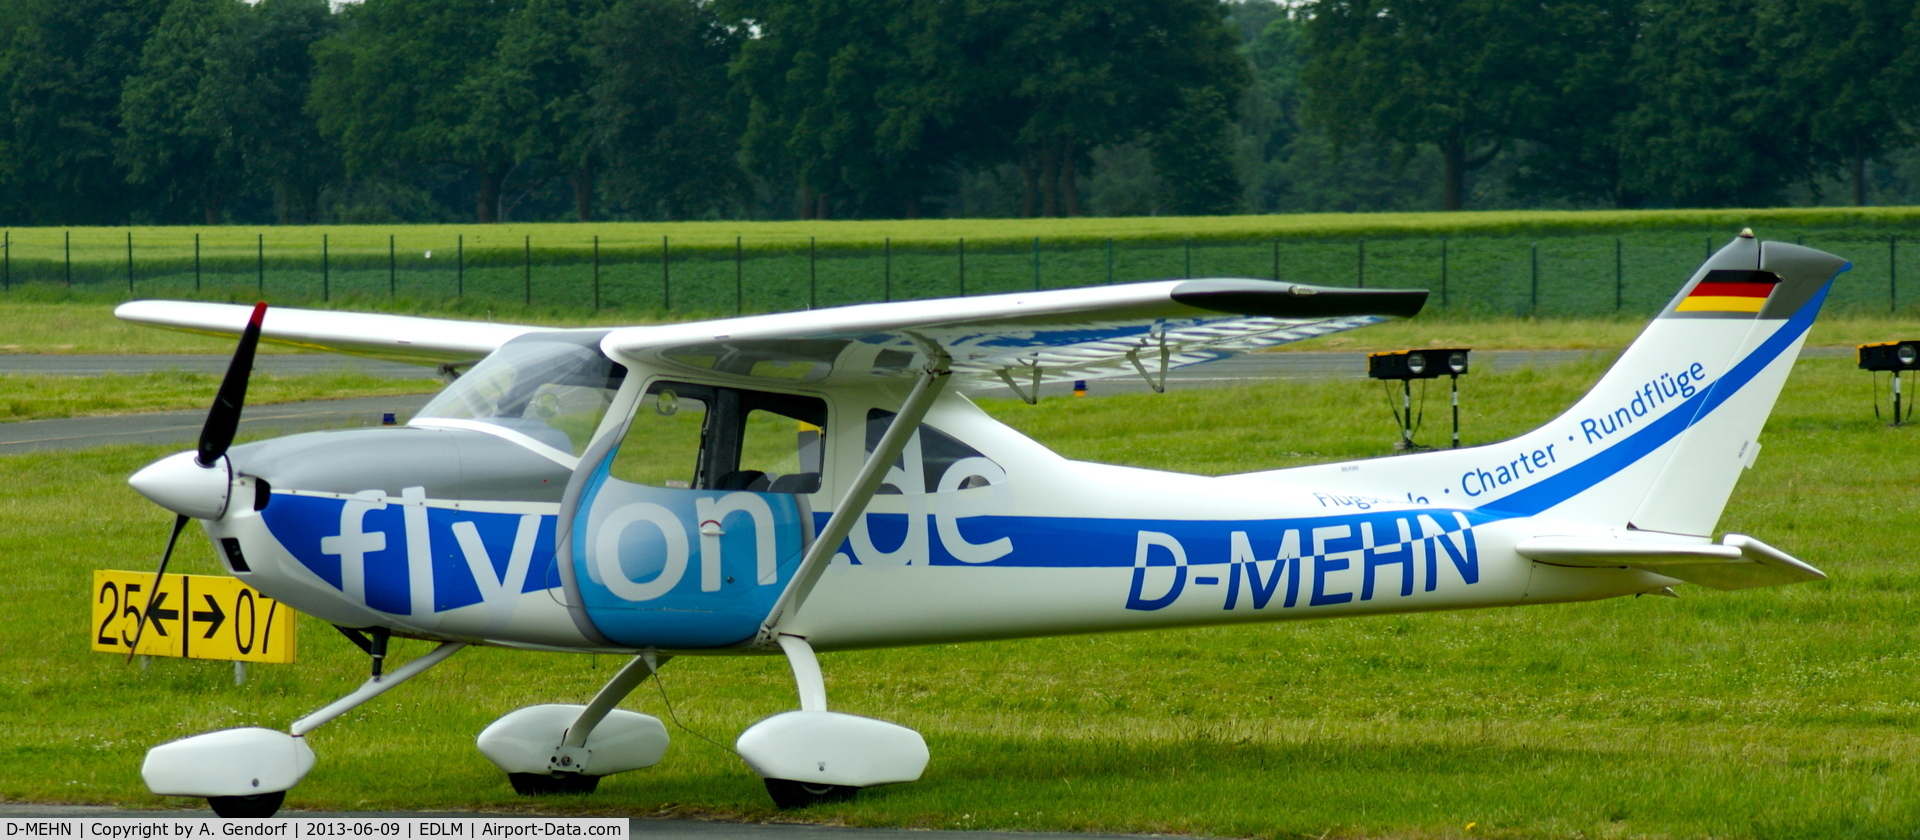 D-MEHN, AirLony Skylane C/N Not found D-MEHN, Seen here parked at the apron at Marl-Loemühle (EDLM)